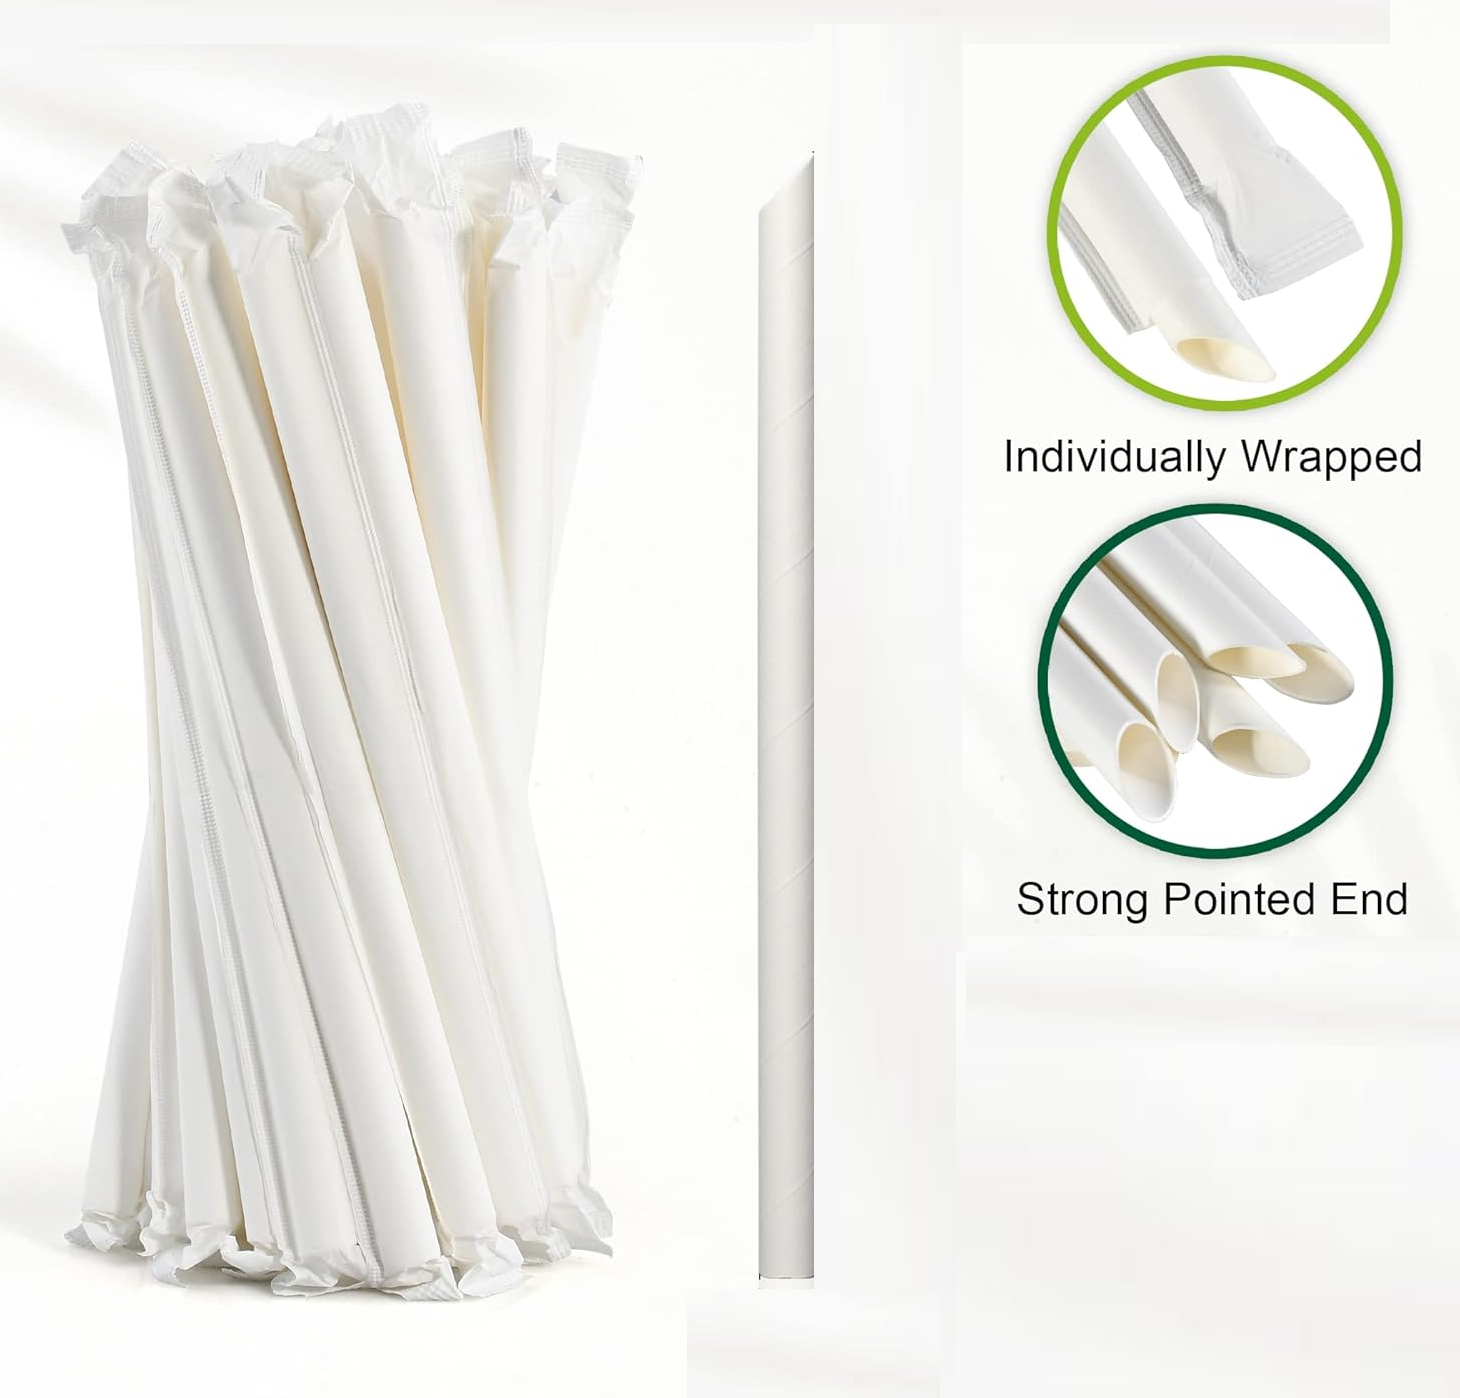 12MM X 197MM BOBA WHITE PAPER STRAWS WITH WRAPPED AND